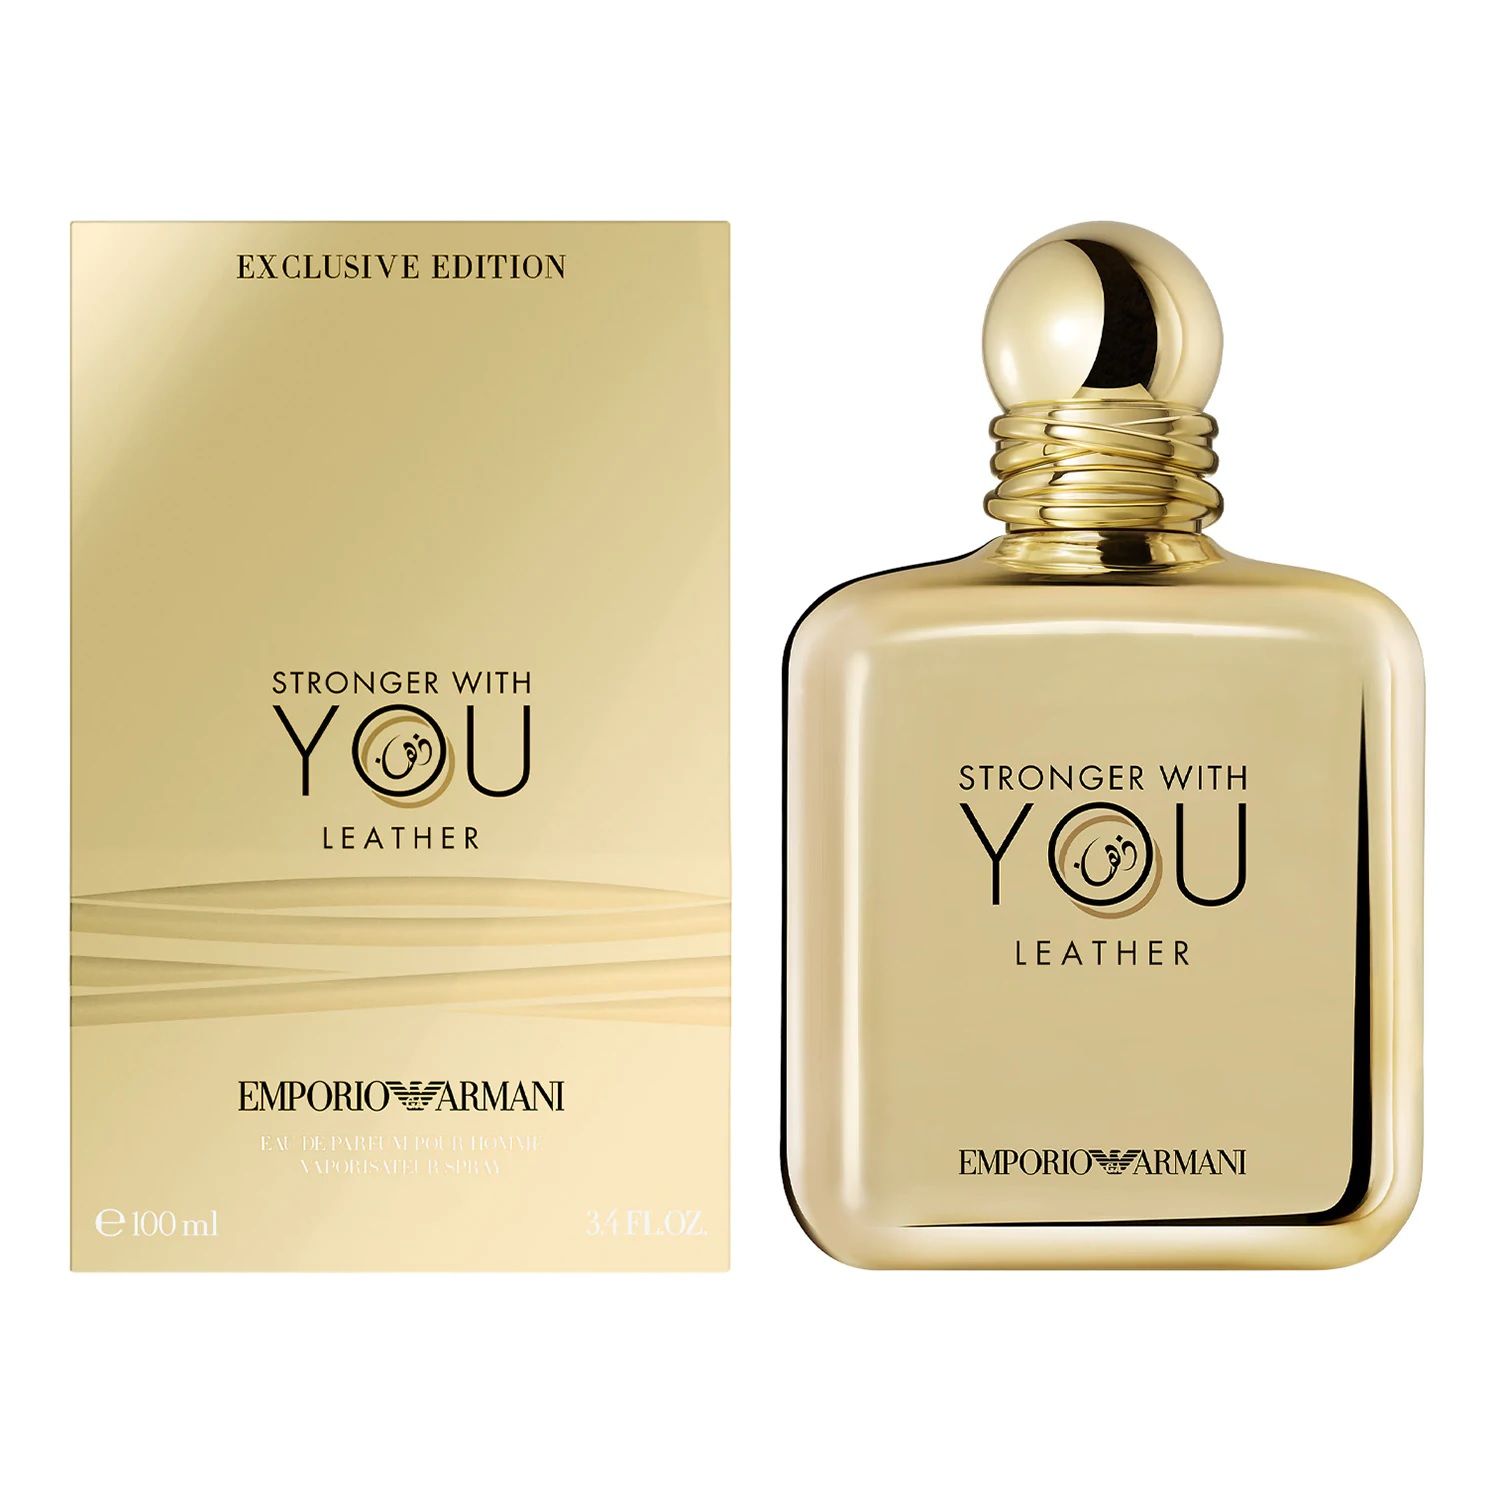 Emporio Armani Stronger With You Leather Giorgio Armani ماء كولونيا - a جديد fragrance للرجال 2020